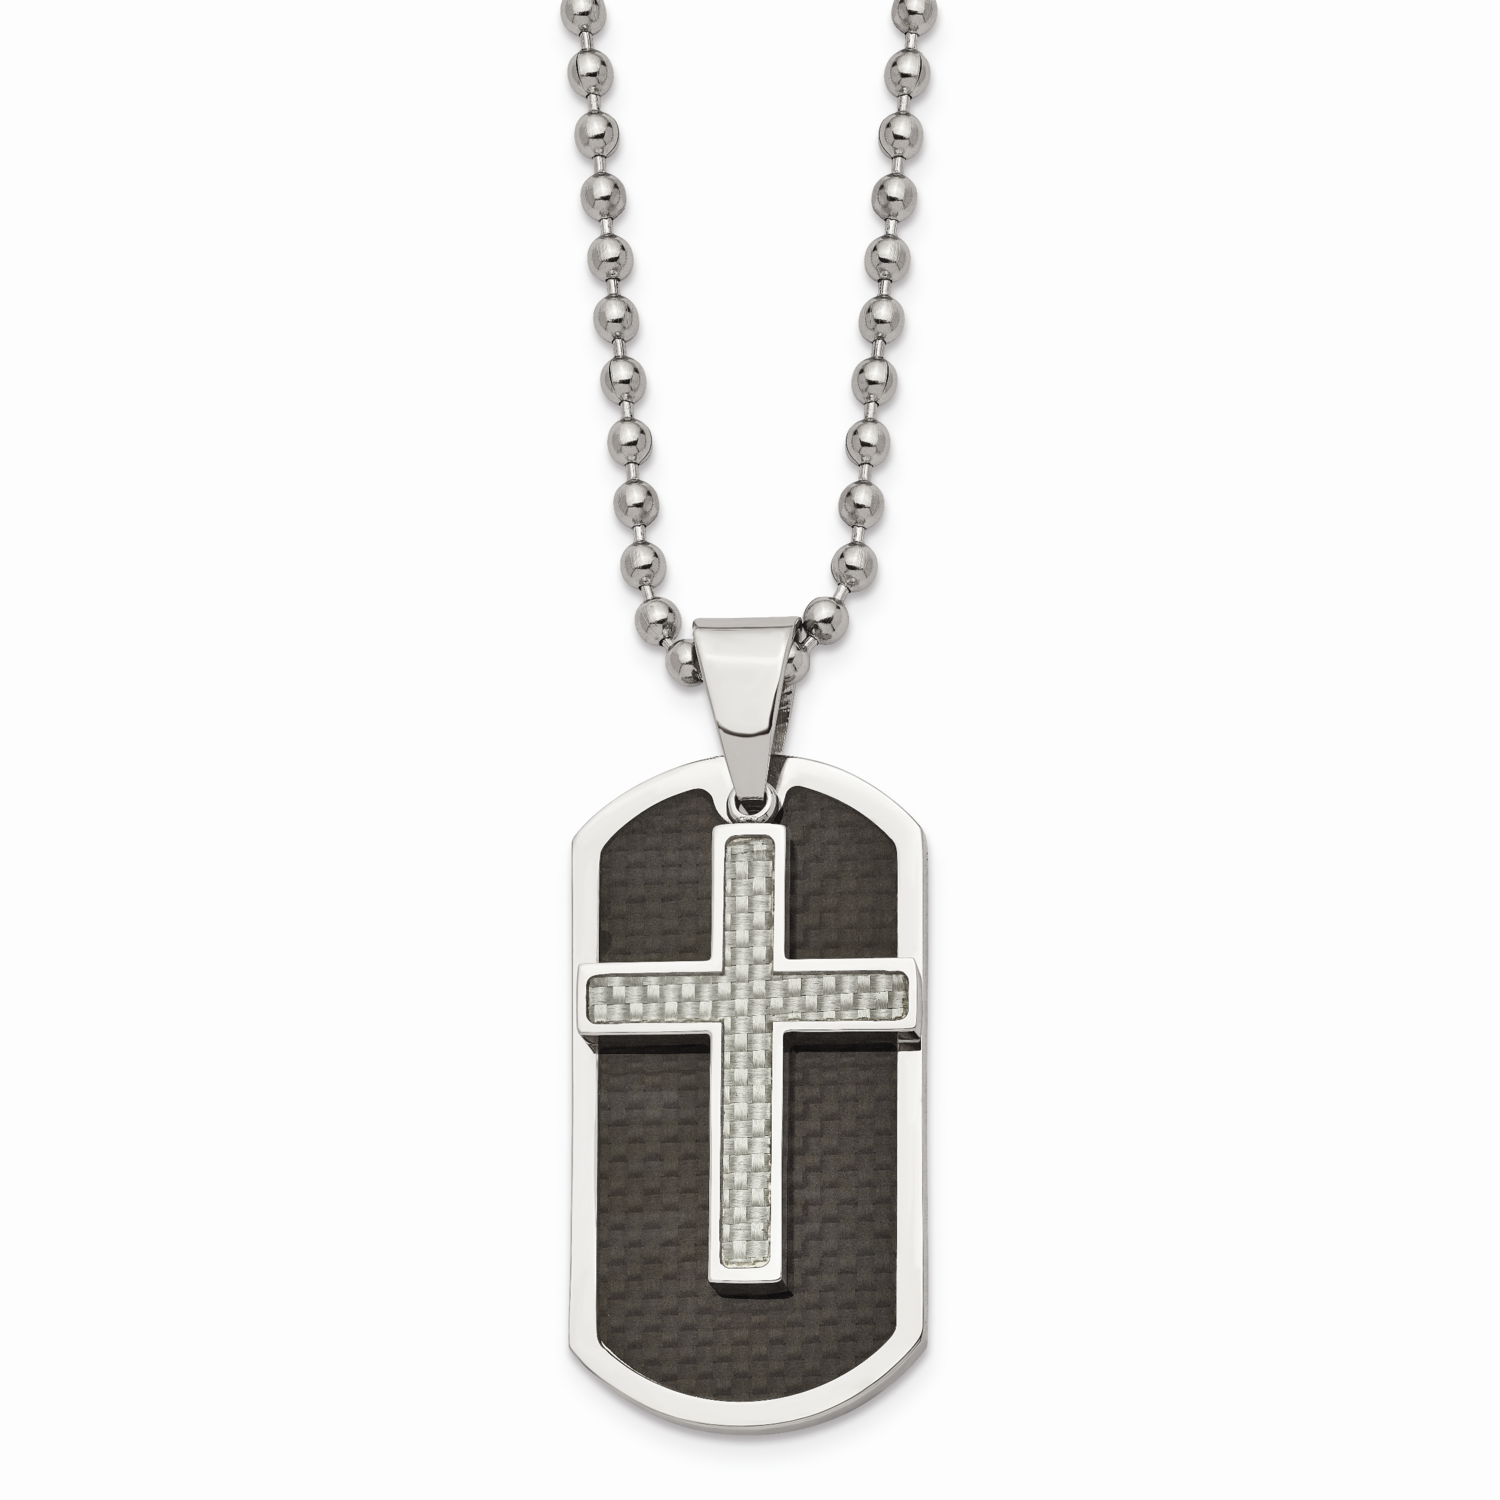 Blk/Grey Carbon Fiber Inlay Cross/DogTag Necklace Stainless Steel Polished SRN840-24